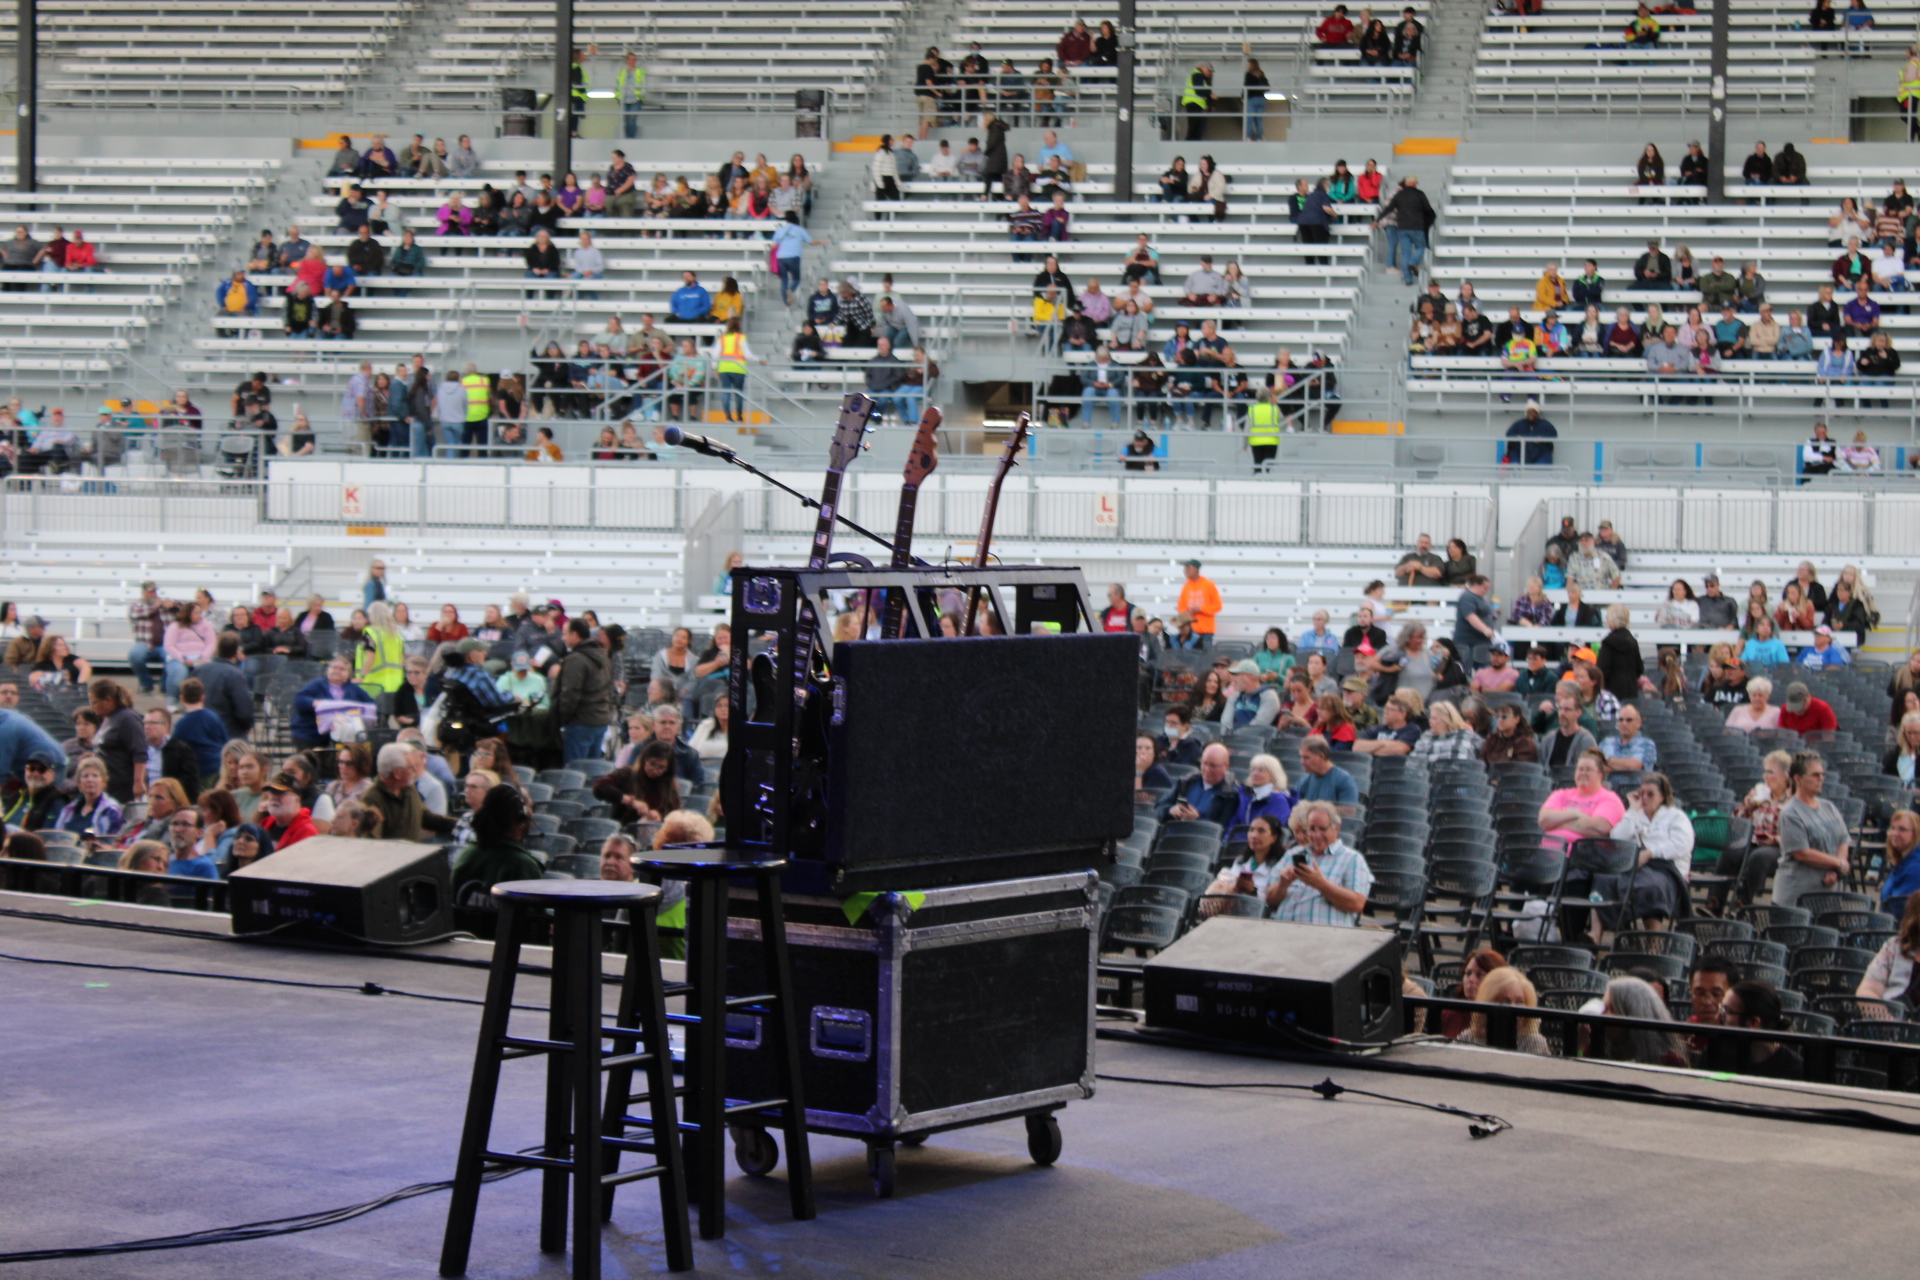 The view from backstage before a show  at the Fair starts, as concertgoers settle into their seats. I think overall we work really well together as a team. Like we try to help each other out,” Duggan said.